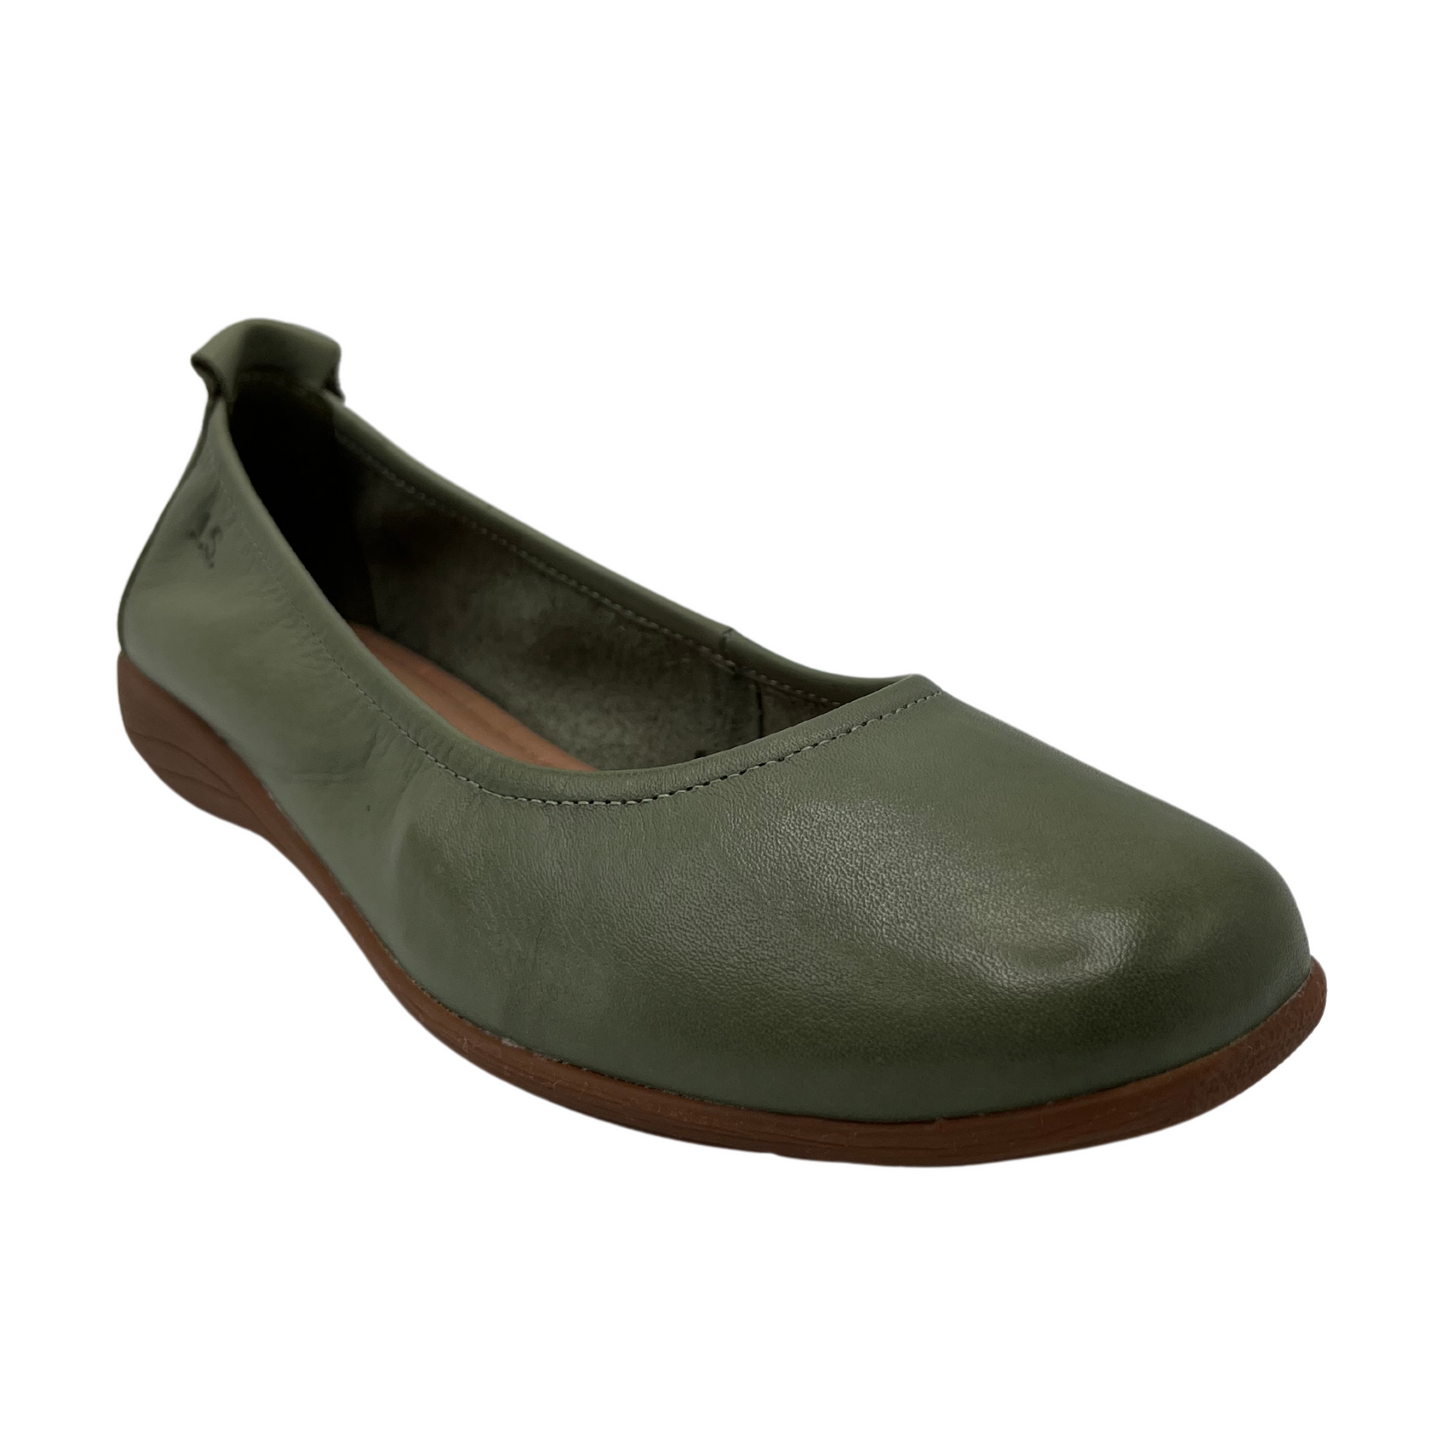 45 degree angled view of mint leather ballet flat with rubber outsole